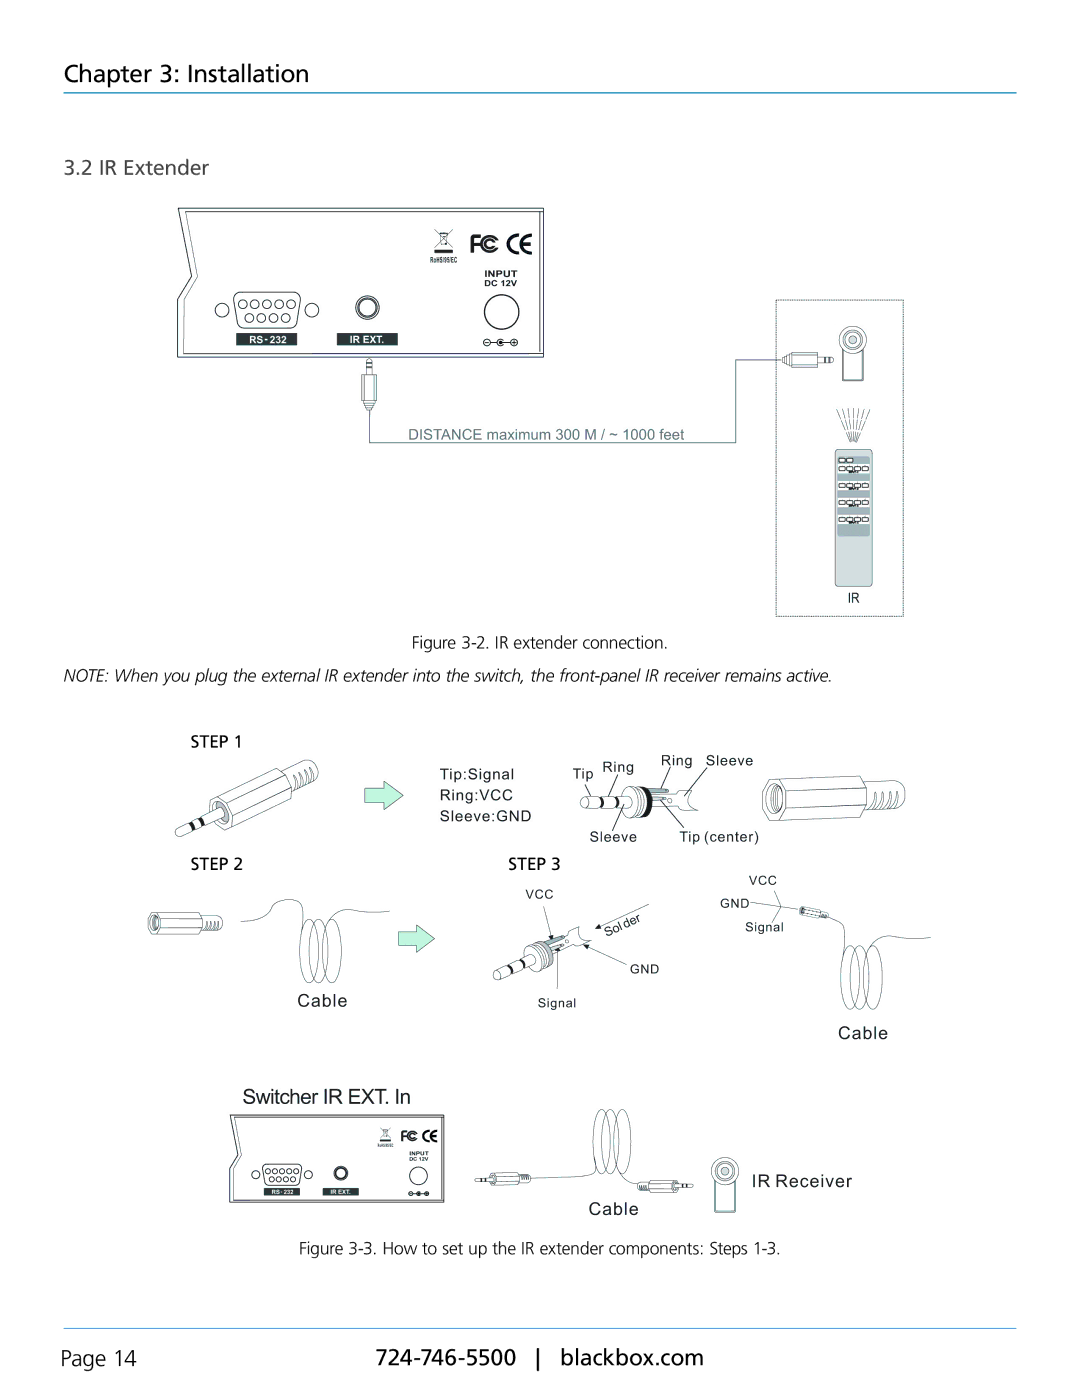 Black Box VSW-HDMI4X4-B, 4 x 4 HDMI Matrix Switch IR extender connection, How to set up the IR extender components Steps 